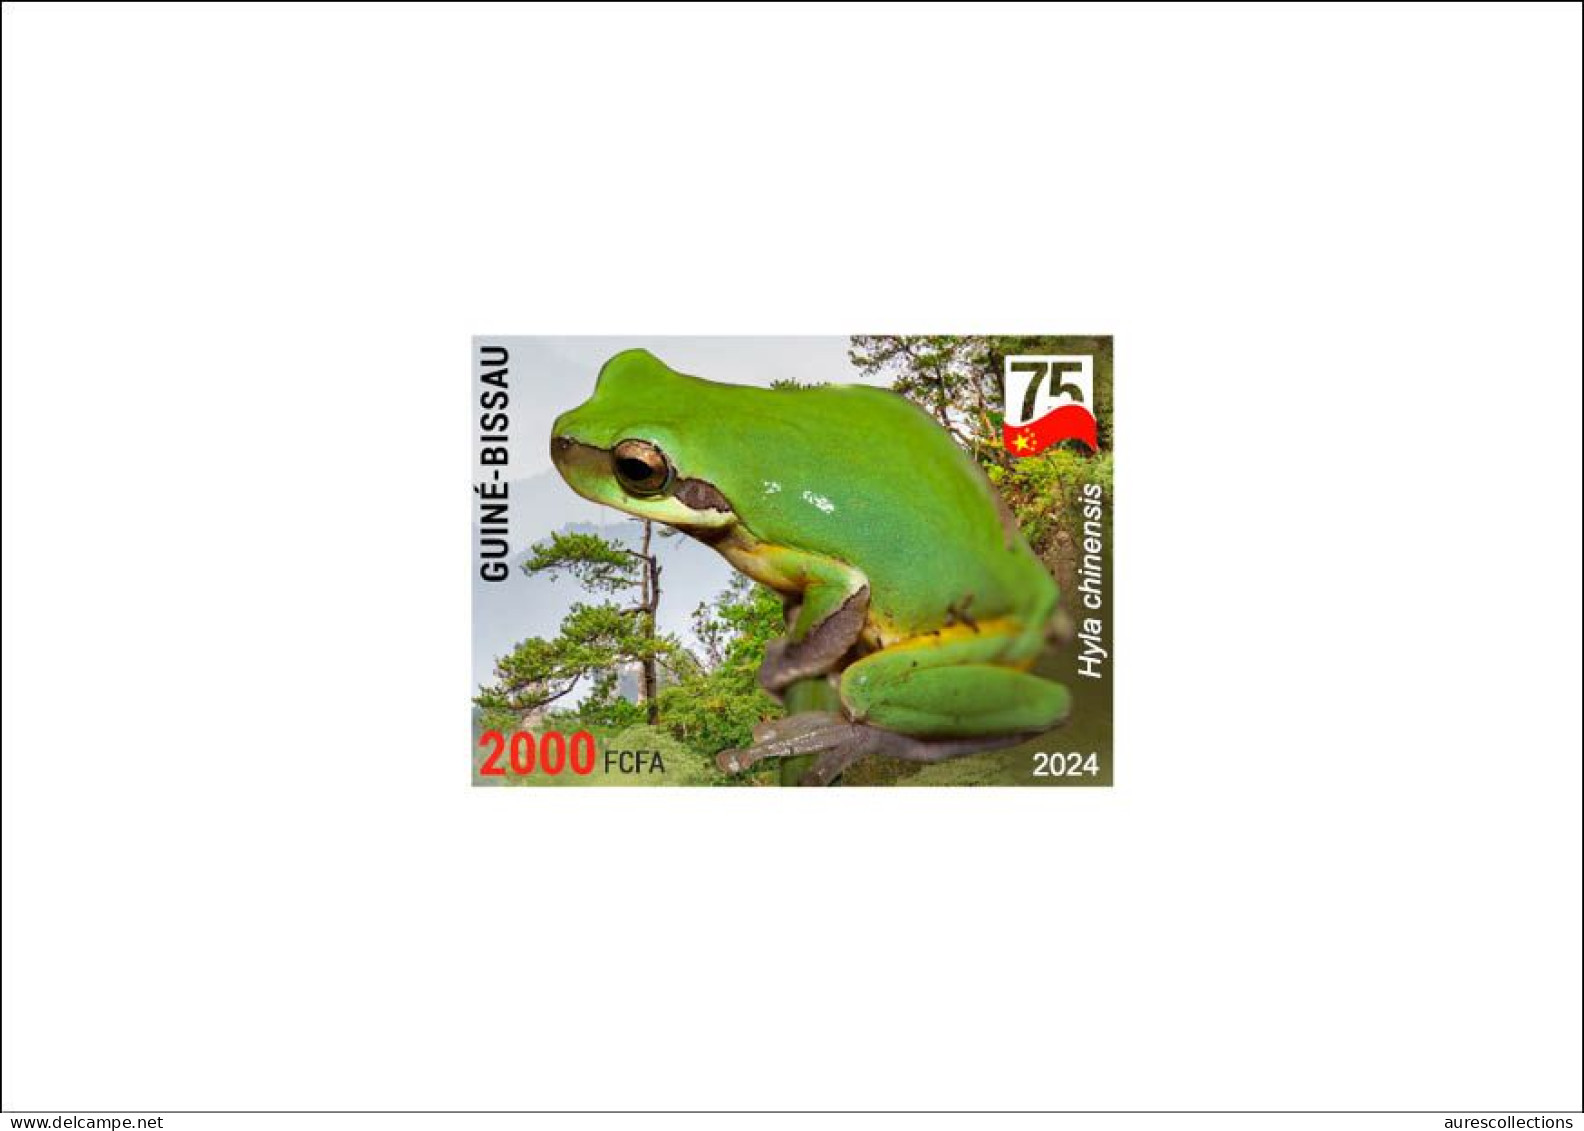 GUINEA BISSAU 2024 DELUXE PROOF - CHINA AMPHIBIANS & REPTILES - CHINESE TREE FROG FROGS GRENOUILLES - CHINA 75 ANNIV. - Frösche